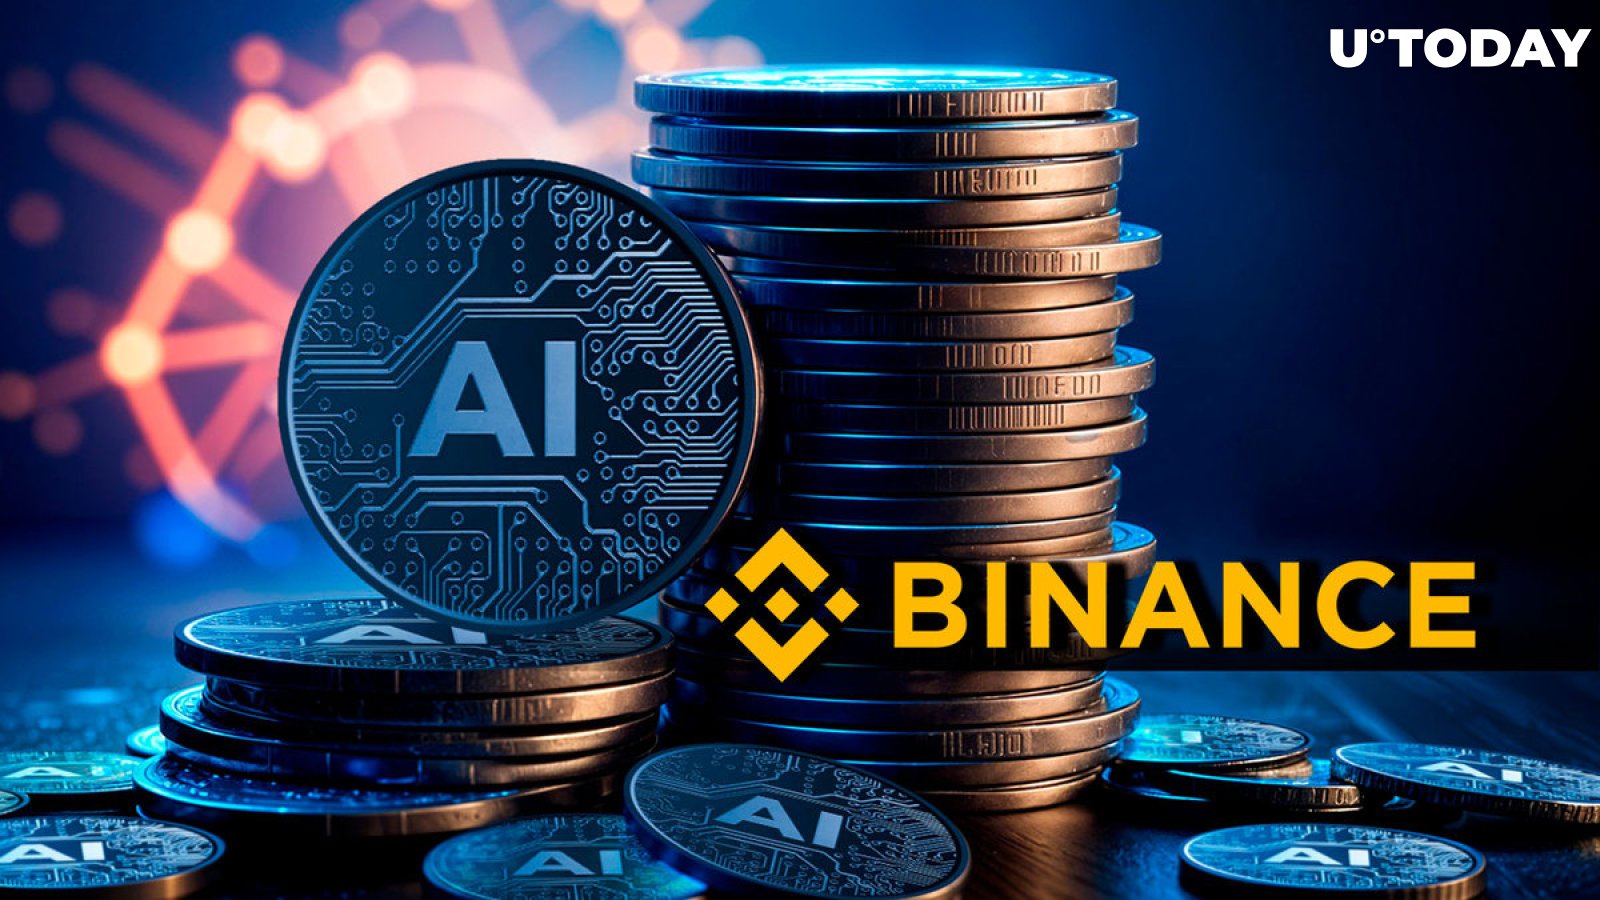 Binance to Delist Crypto AI Spot Trading Pairs, Here's Reason